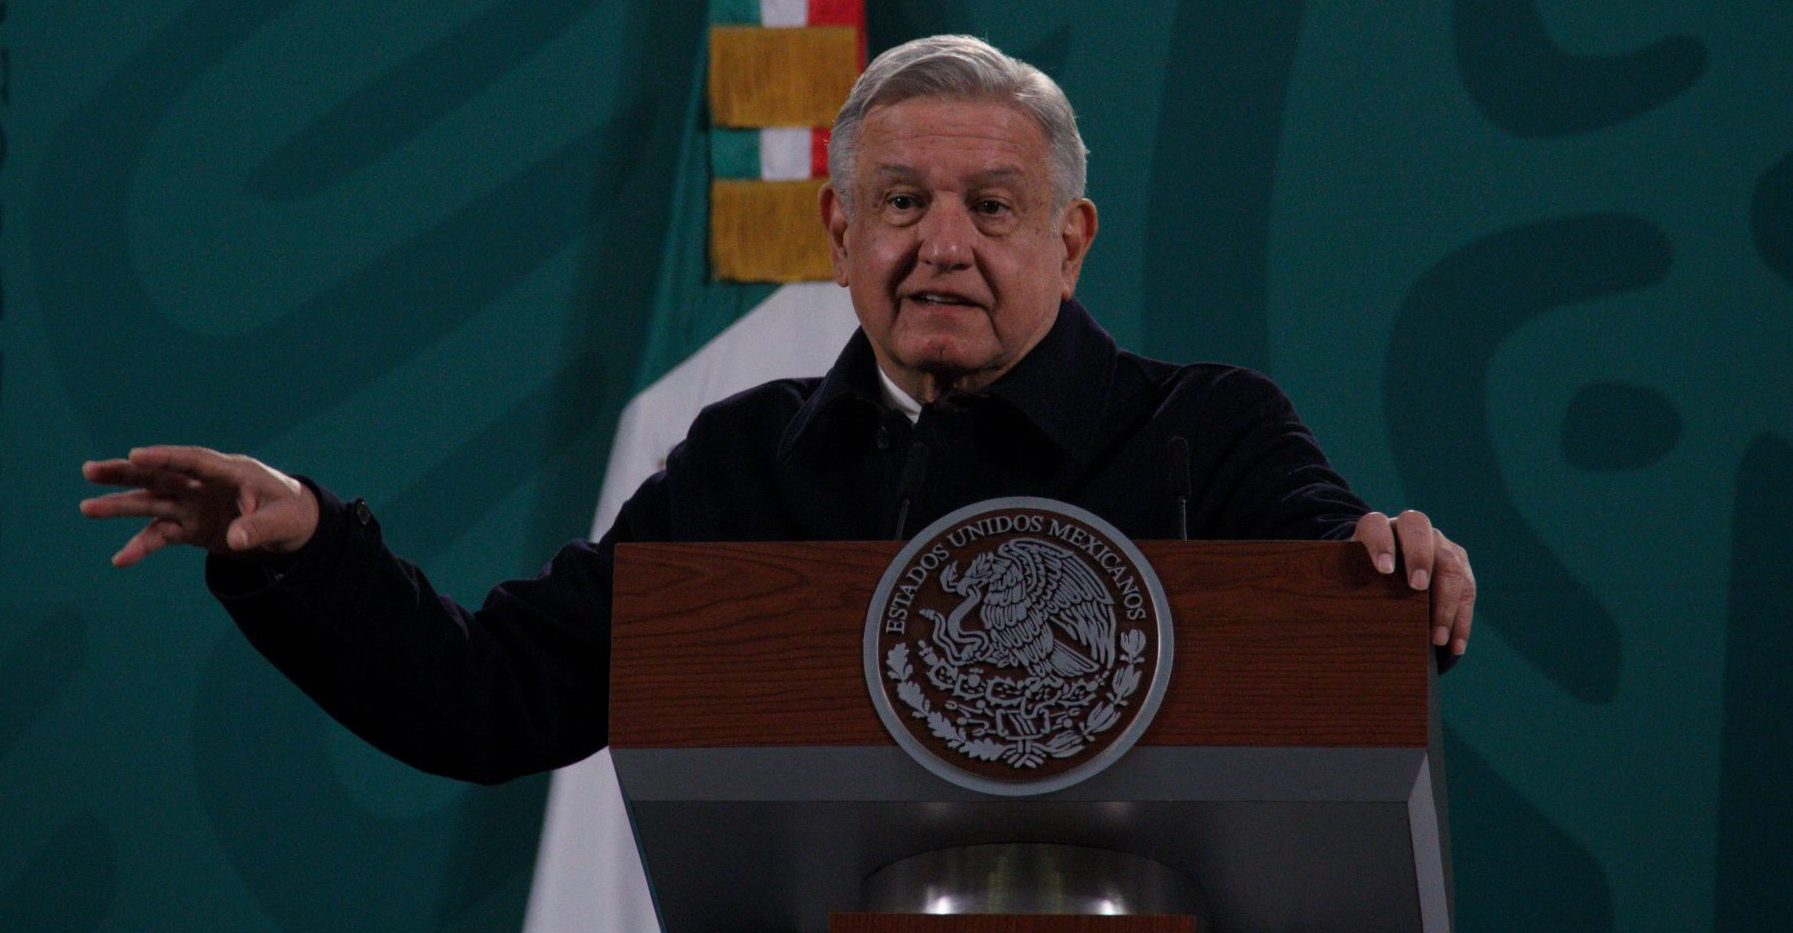 Electricity in the north has been restored to 80%: AMLO